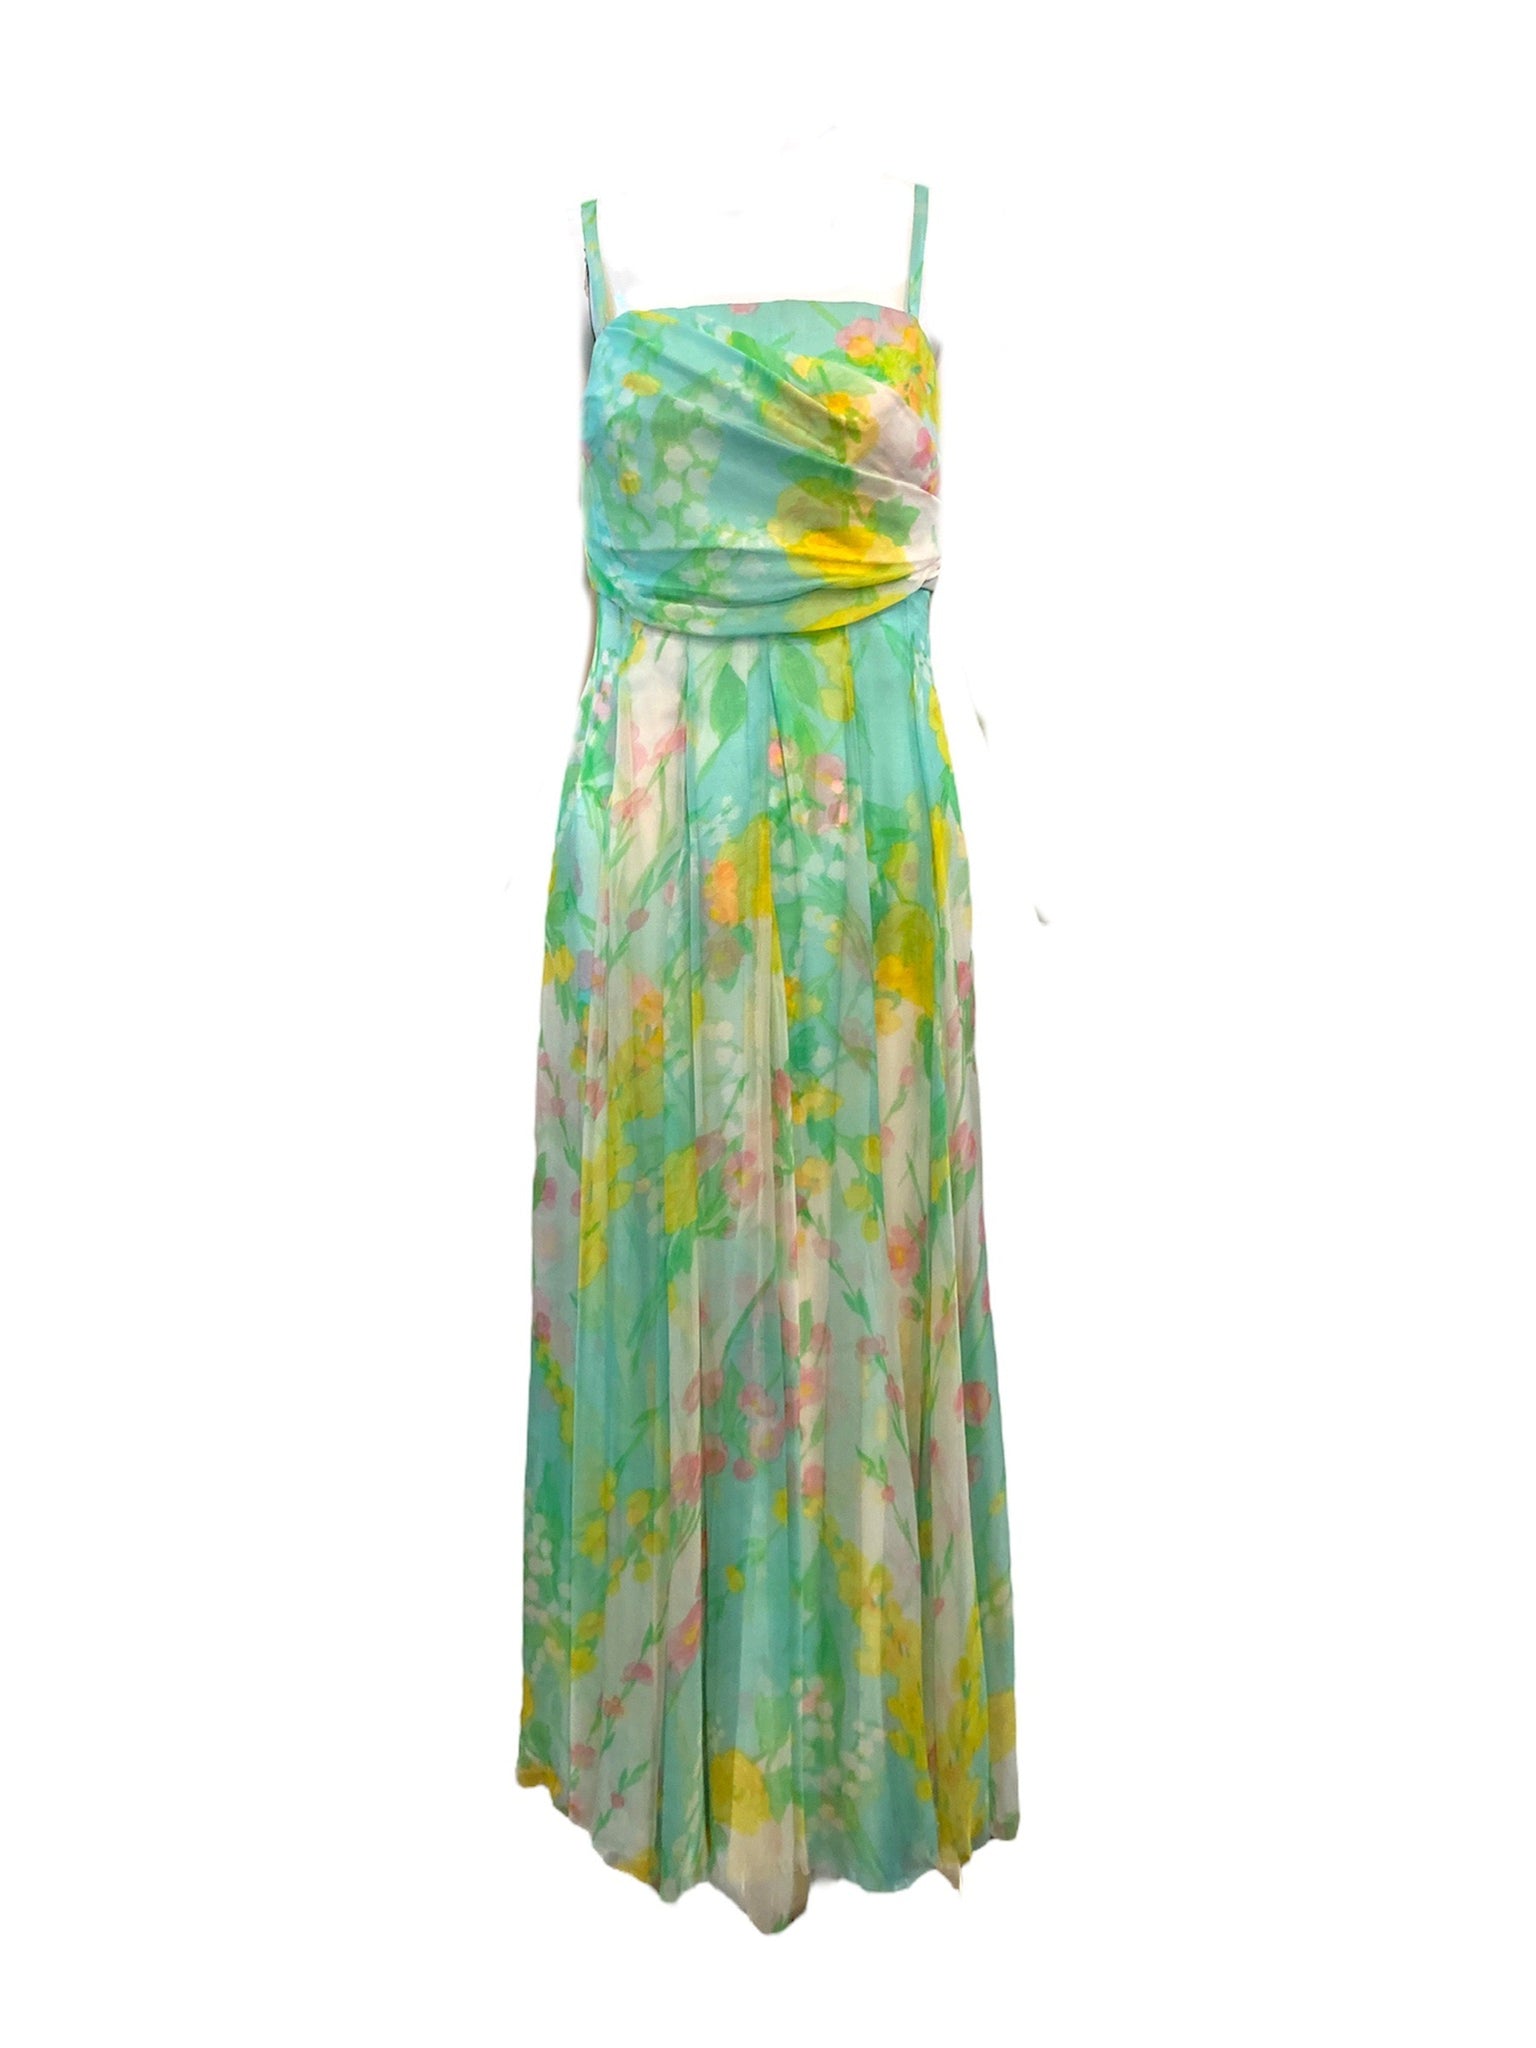 Sophie of Saks Pastel Watercolor Silk Floral Chiffon Gown with Matching Jacket DRESS FRONT 3 of 8